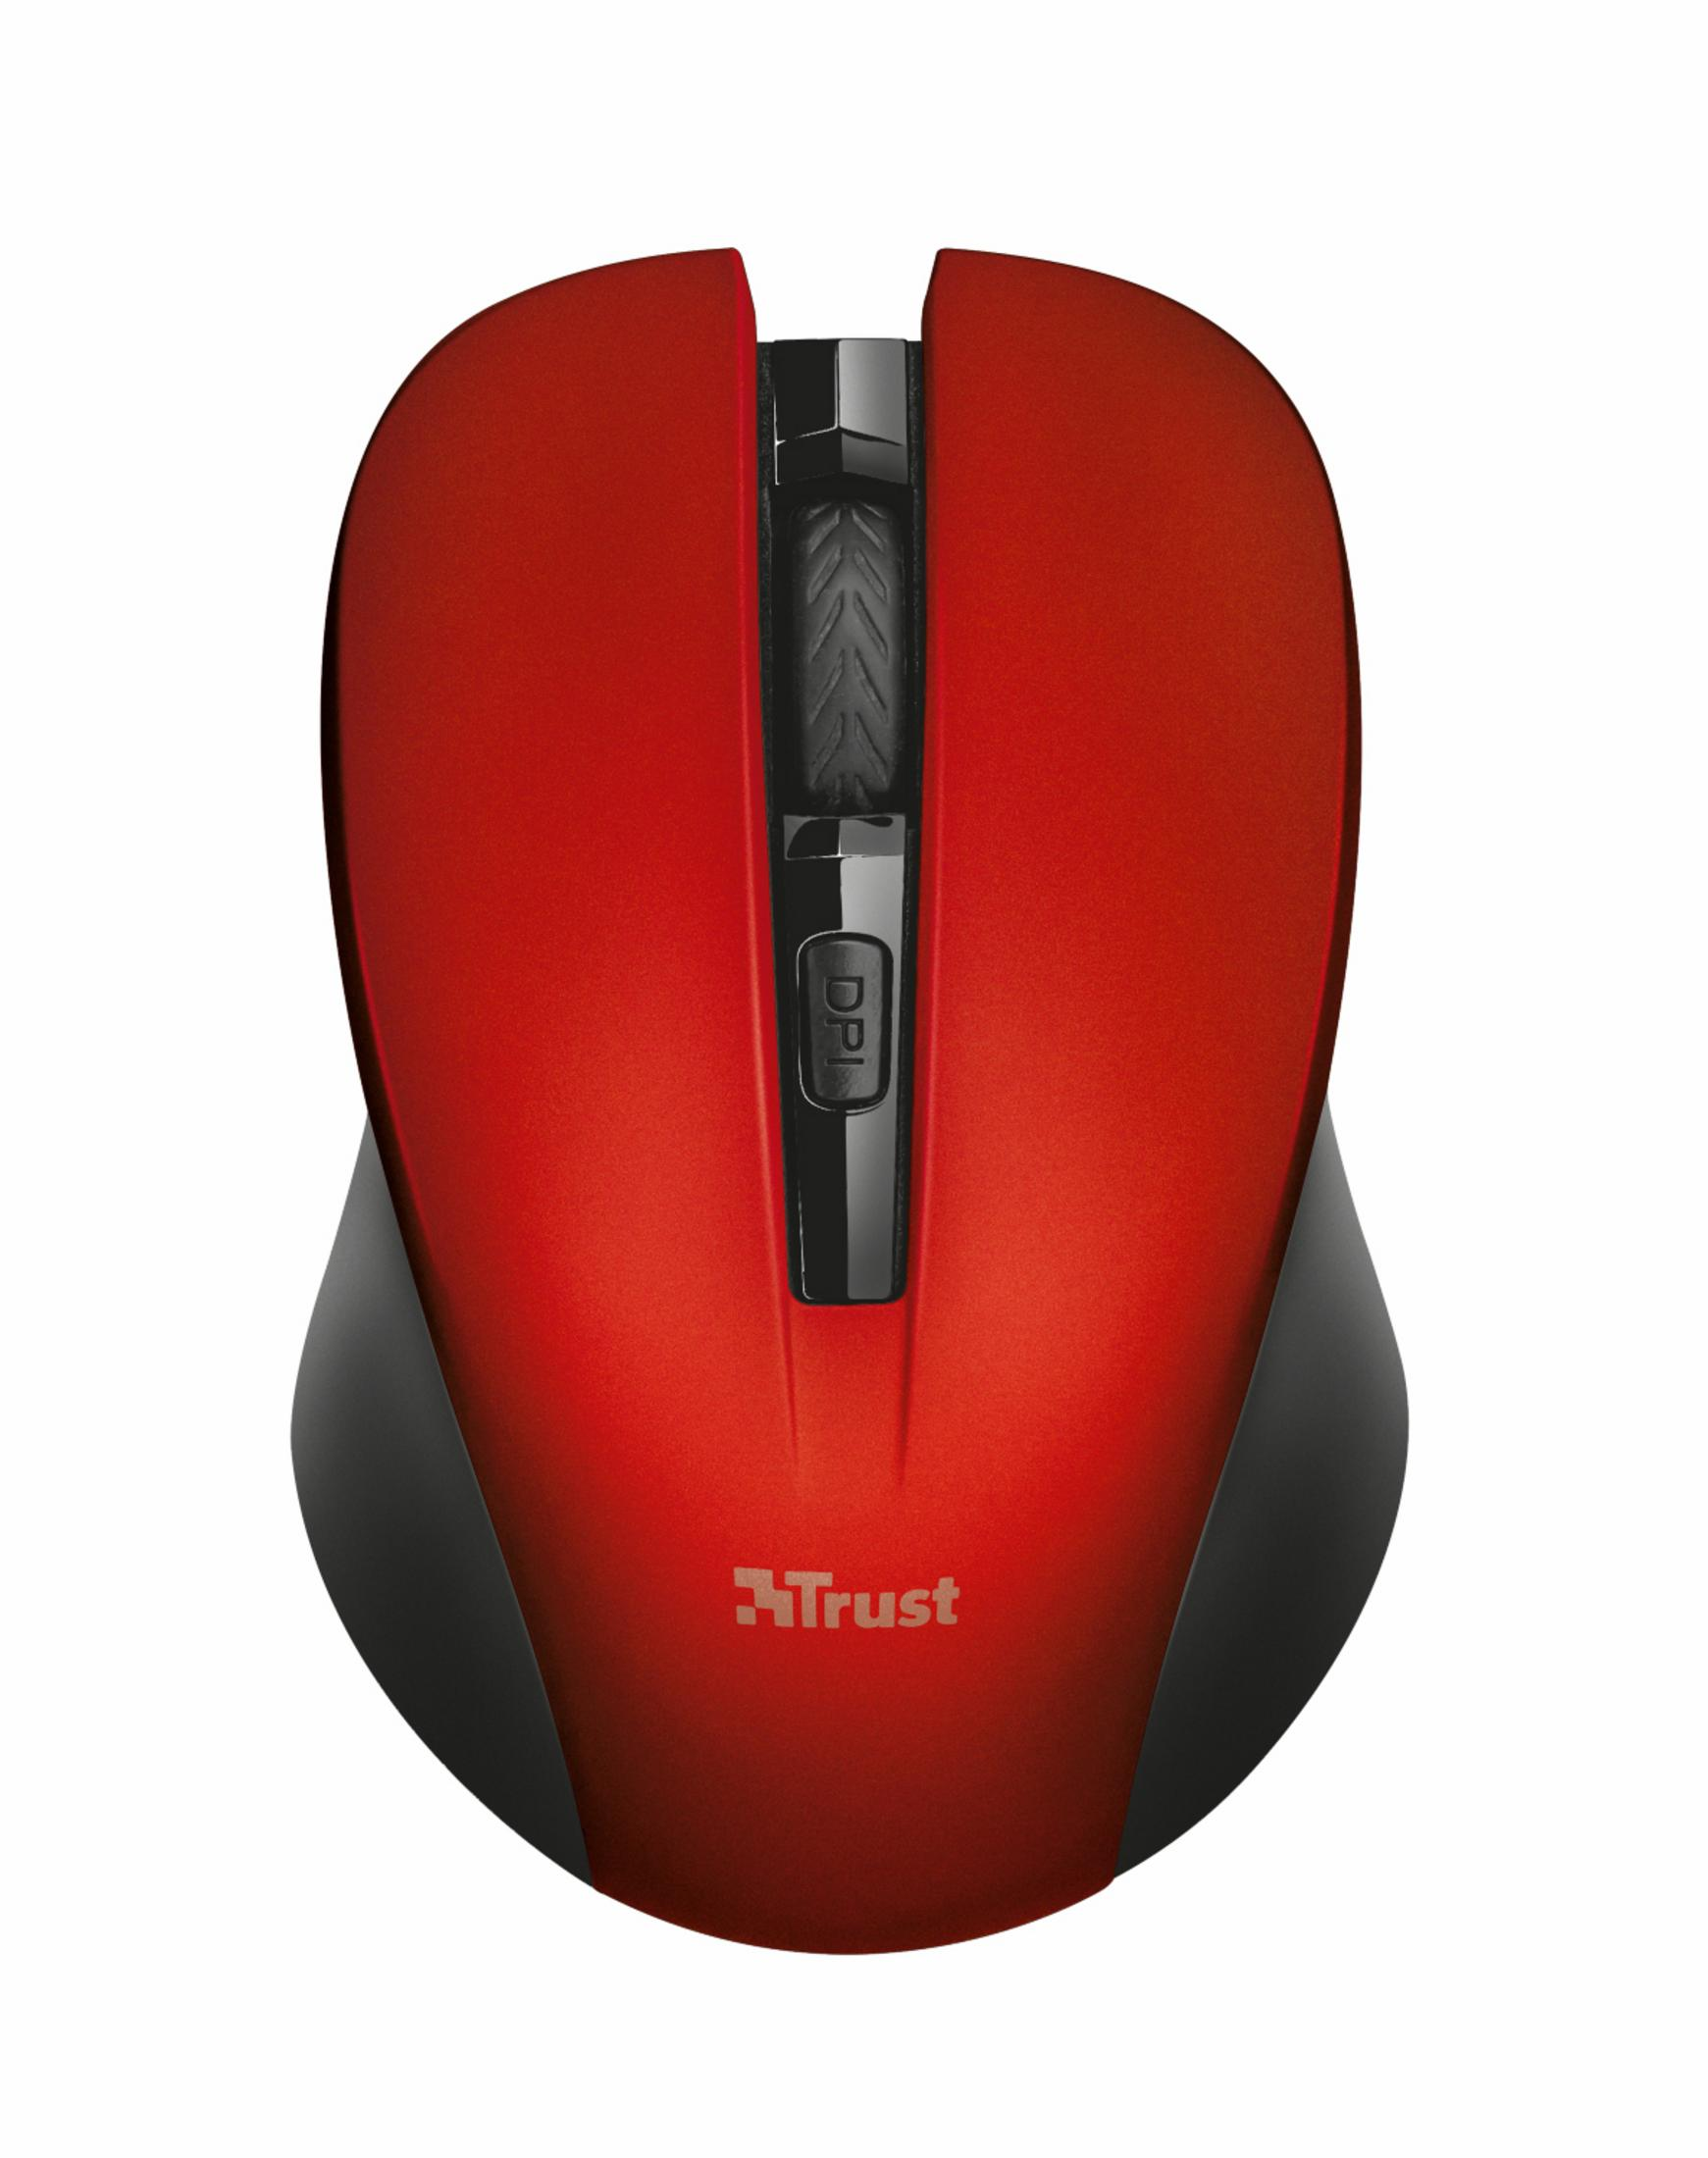 TRUST 21871 Rot SILENT CLICK WRLS MYDO MOUSE RED Maus